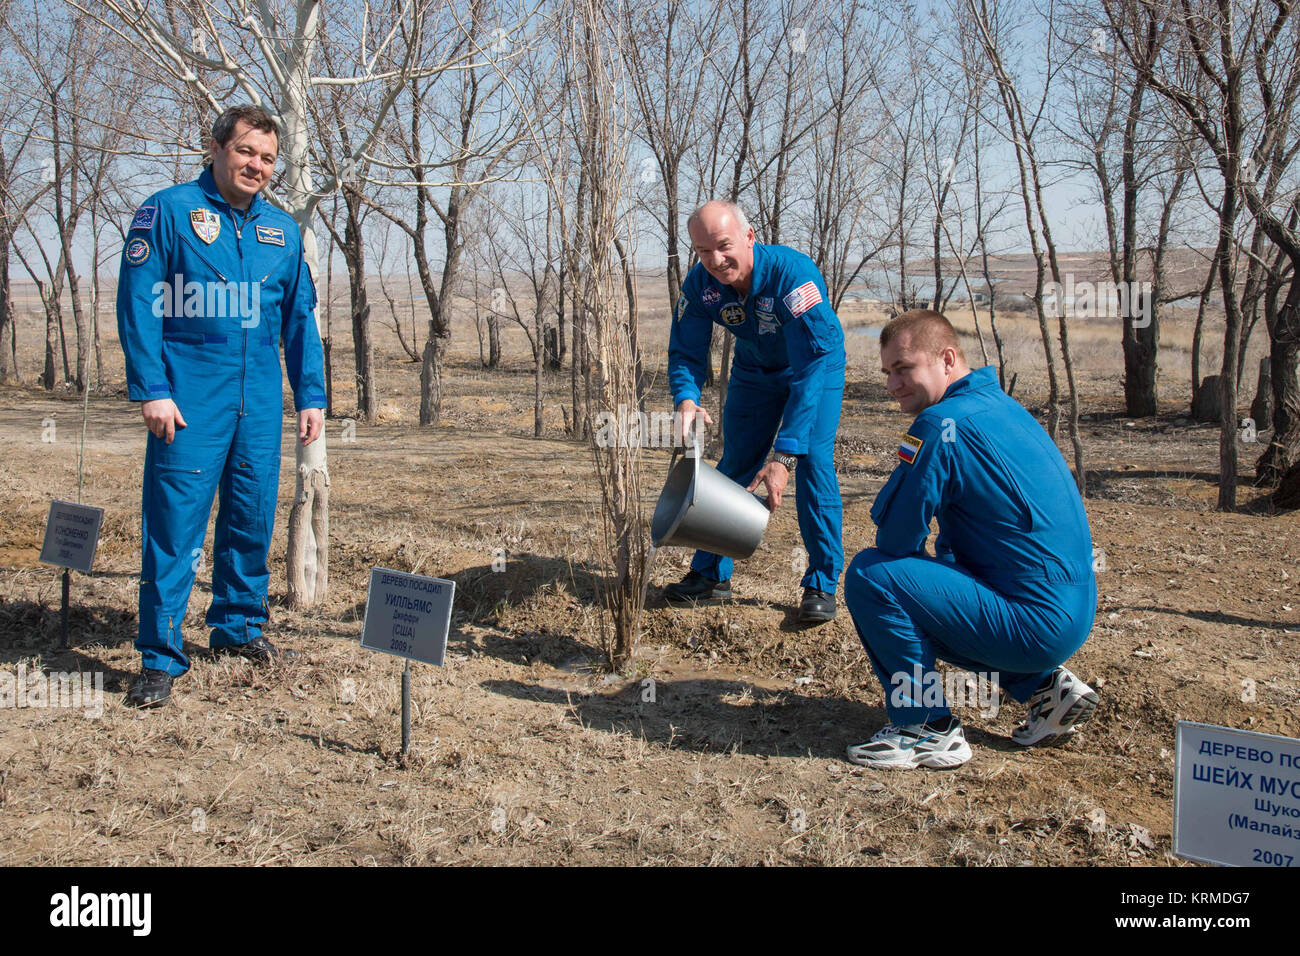 Behind the Cosmonaut Hotel crew quarters in Baikonur, Kazakhstan, Expedition 47-48 crewmember Jeff Williams of NASA (center) waters a tree previously planted in his name March 12 as part of traditional pre-launch activities. His crewmates, Oleg Skripochka (left) and Alexey Ovchinin (right) of Roscosmos look on. Williams, Ovchinin and Skripochka are conducting final training for their launch March 19, Kazakh time, on the Soyuz TMA-20M spacecraft for a six-month mission on the International Space Station.  NASA/Victor Zelentsov Soyuz TMA-20M crew during the tree planting ceremony Stock Photo